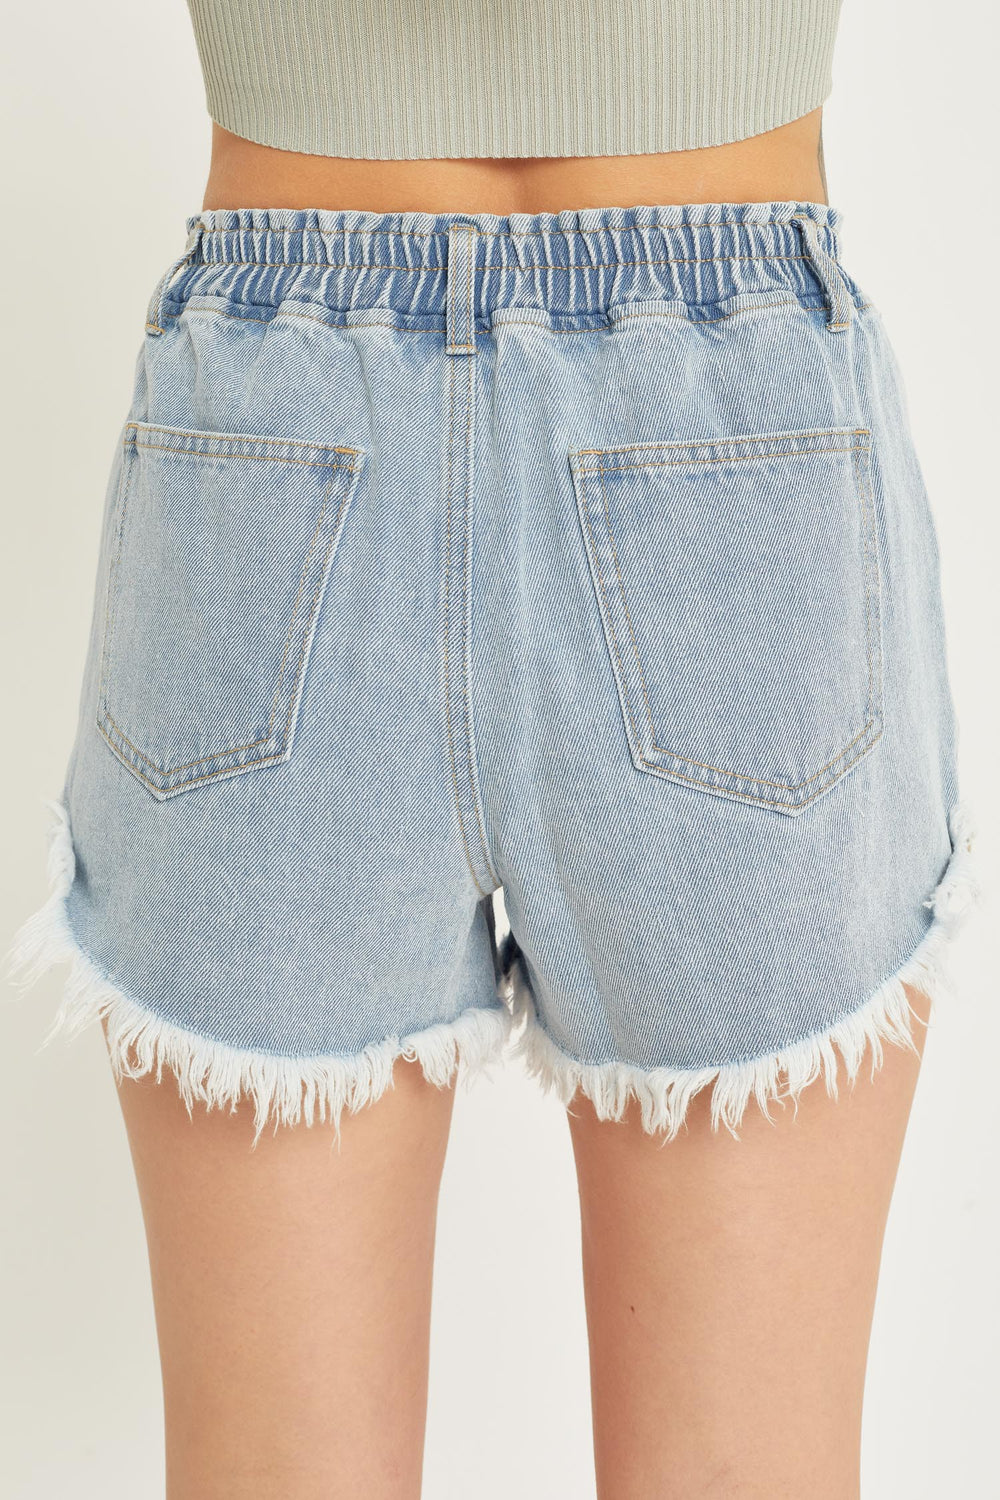 Stretch Waist Denim Frayed Shorts-Bottoms and Jeans-Anatomy Clothing Boutique in Brenham, Texas